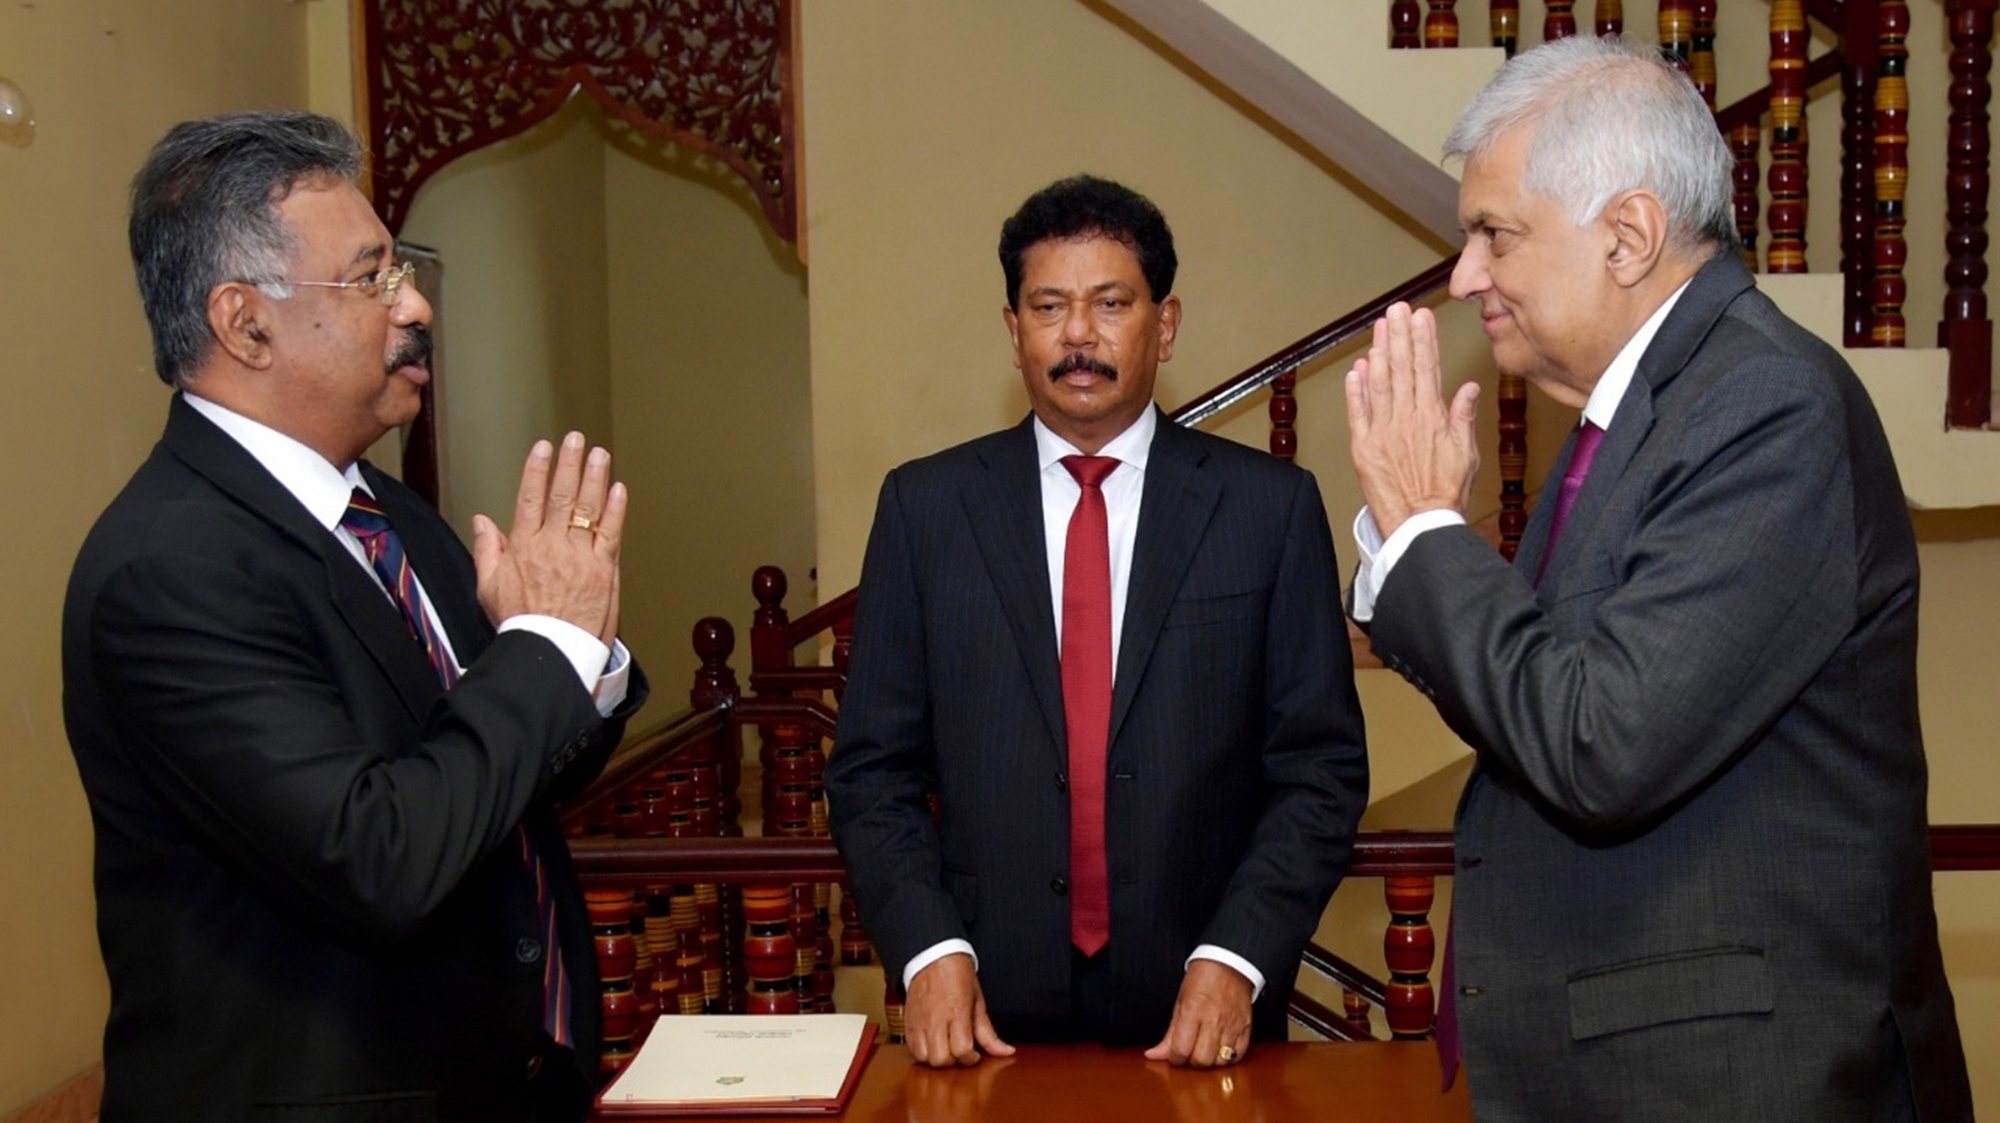 epa10072340 A handout photo made available by the Sri Lankan President&#039;s Media Division shows Sri Lankan Prime Minister Ranil Wickremesinghe (R) taking the oath as interim president of Sri Lanka before Chief Justice Jayantha Jayasuriya (L) in Colombo, Sri Lanka, 15 July 2022. Wickremesinghe was sworn in as the Parliament of Sri Lanka on 15 July accepted the resignation of President Gotabaya Rajapaksa, after he fled to Singapore through the Maldives following months of anti-government protests fueled by the ongoing economic crisis.  EPA/Sri Lankan President&#039;s Media Division HANDOUT  HANDOUT EDITORIAL USE ONLY/NO SALES